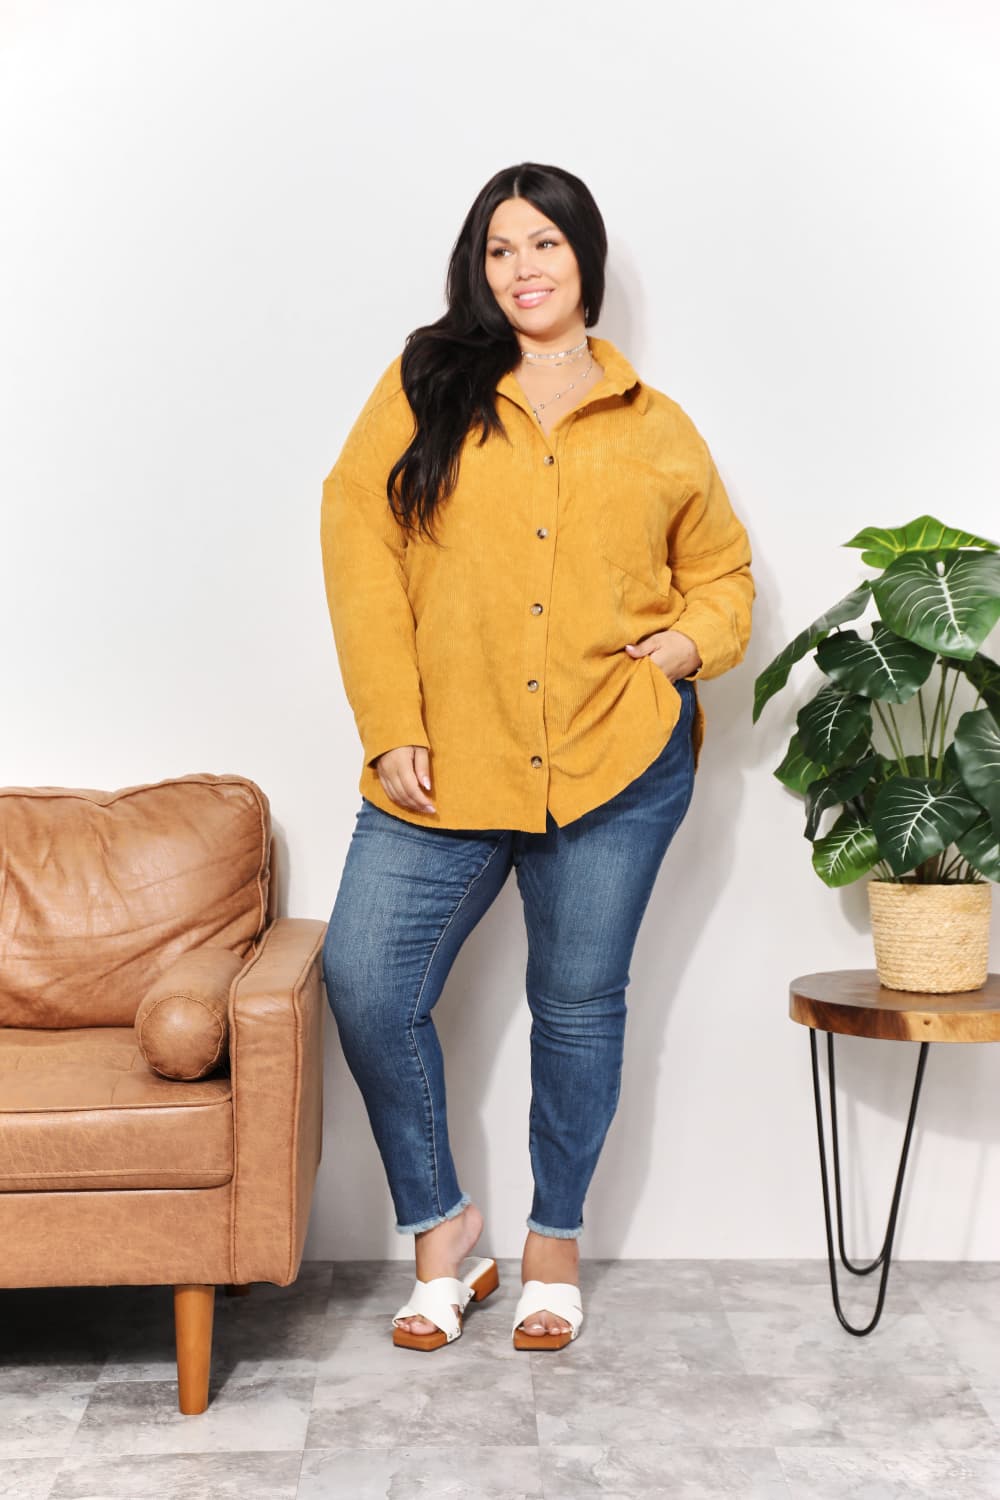 HEYSON Full Size Oversized Corduroy Button-Down Tunic Shirt with Bust Pocket | us.meeeshop